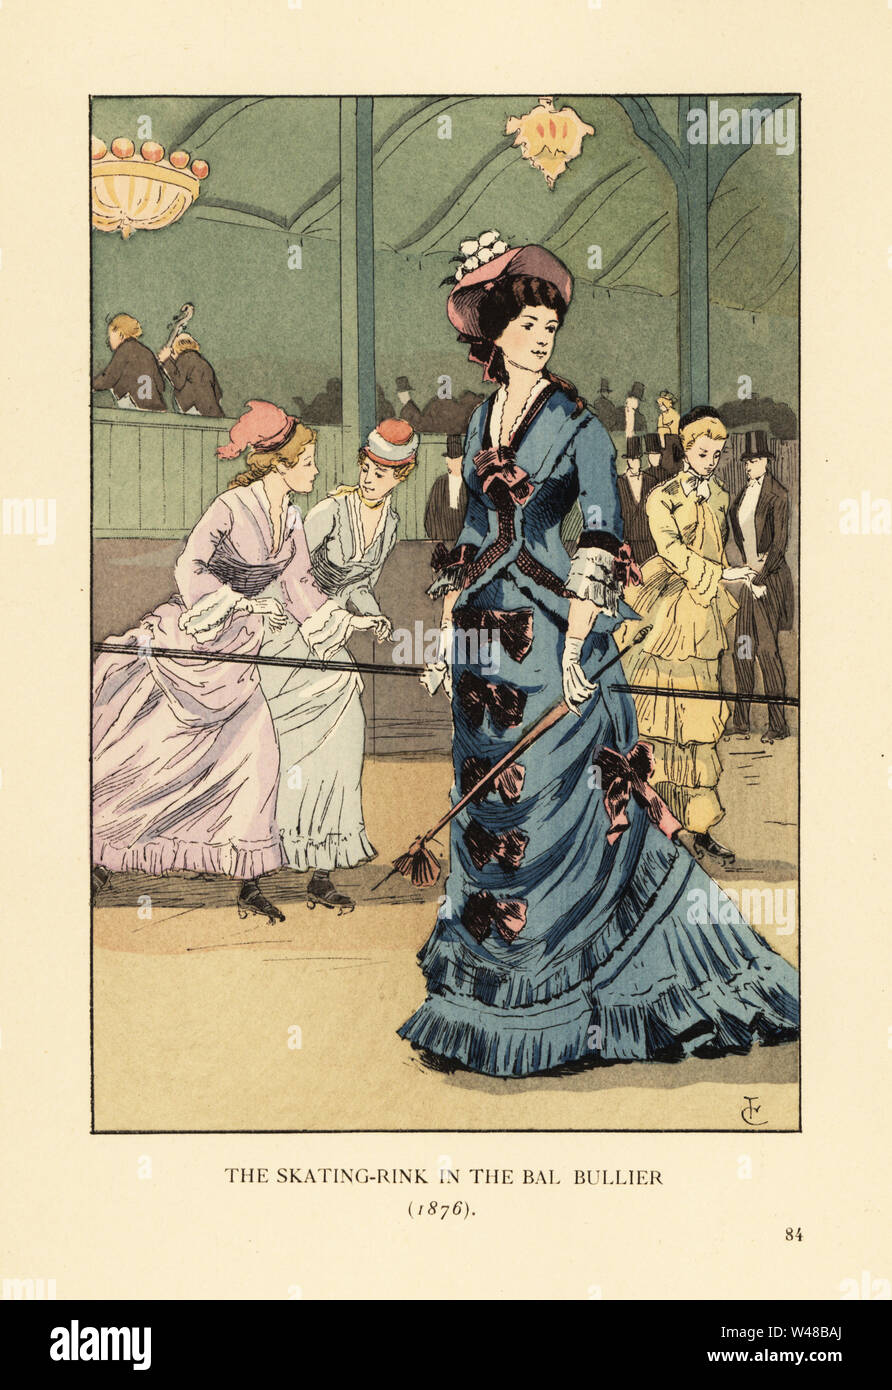 The skating rink in the Bal Bullier, 1876. Fashionable woman in dress with train and ribbon bows watching girls roller skating at Francois Bullier’s ballroom, avenue de l'Observatoire, Paris. Band musicians in the balcony. Handcoloured lithograph by R.V. after an illustration by Francois Courboin from Octave Uzanne’s Fashion in Paris, William Heinemann, London, 1898. Stock Photo